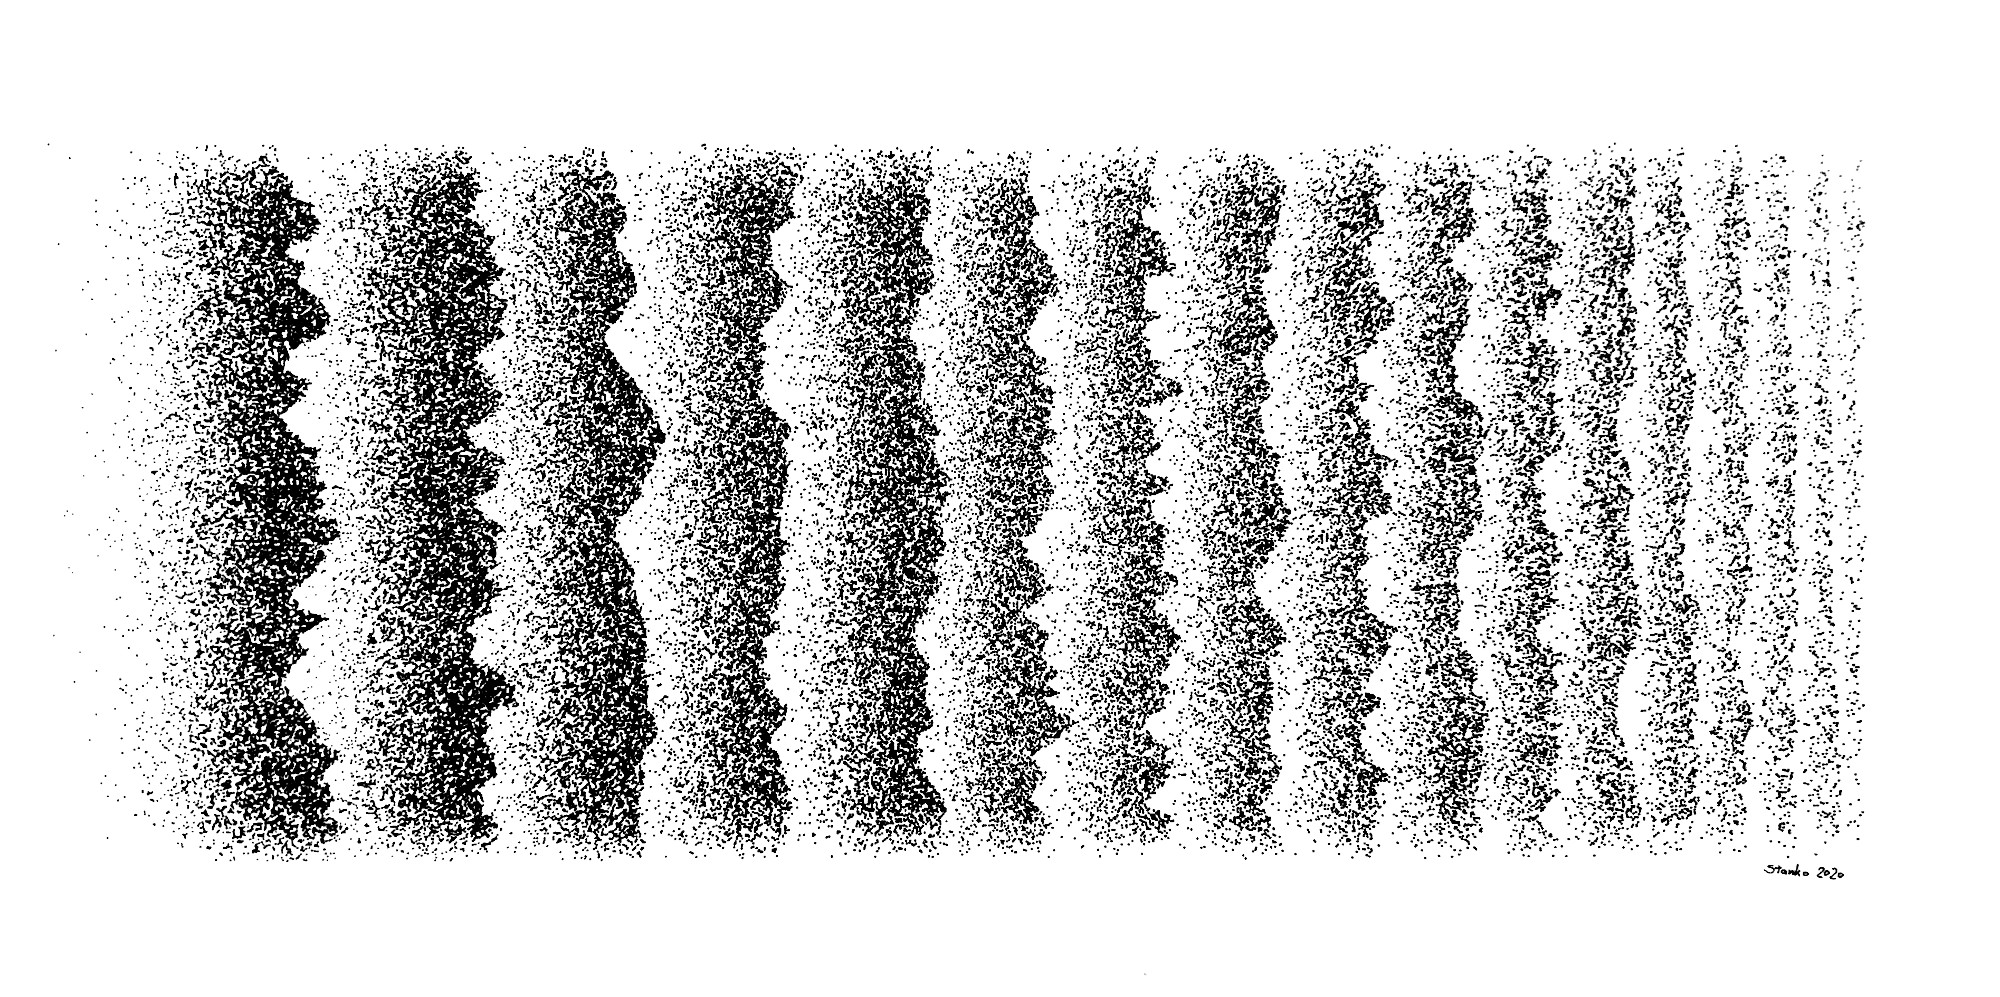 "Beach", generative piece consisting of 116 thousands dots